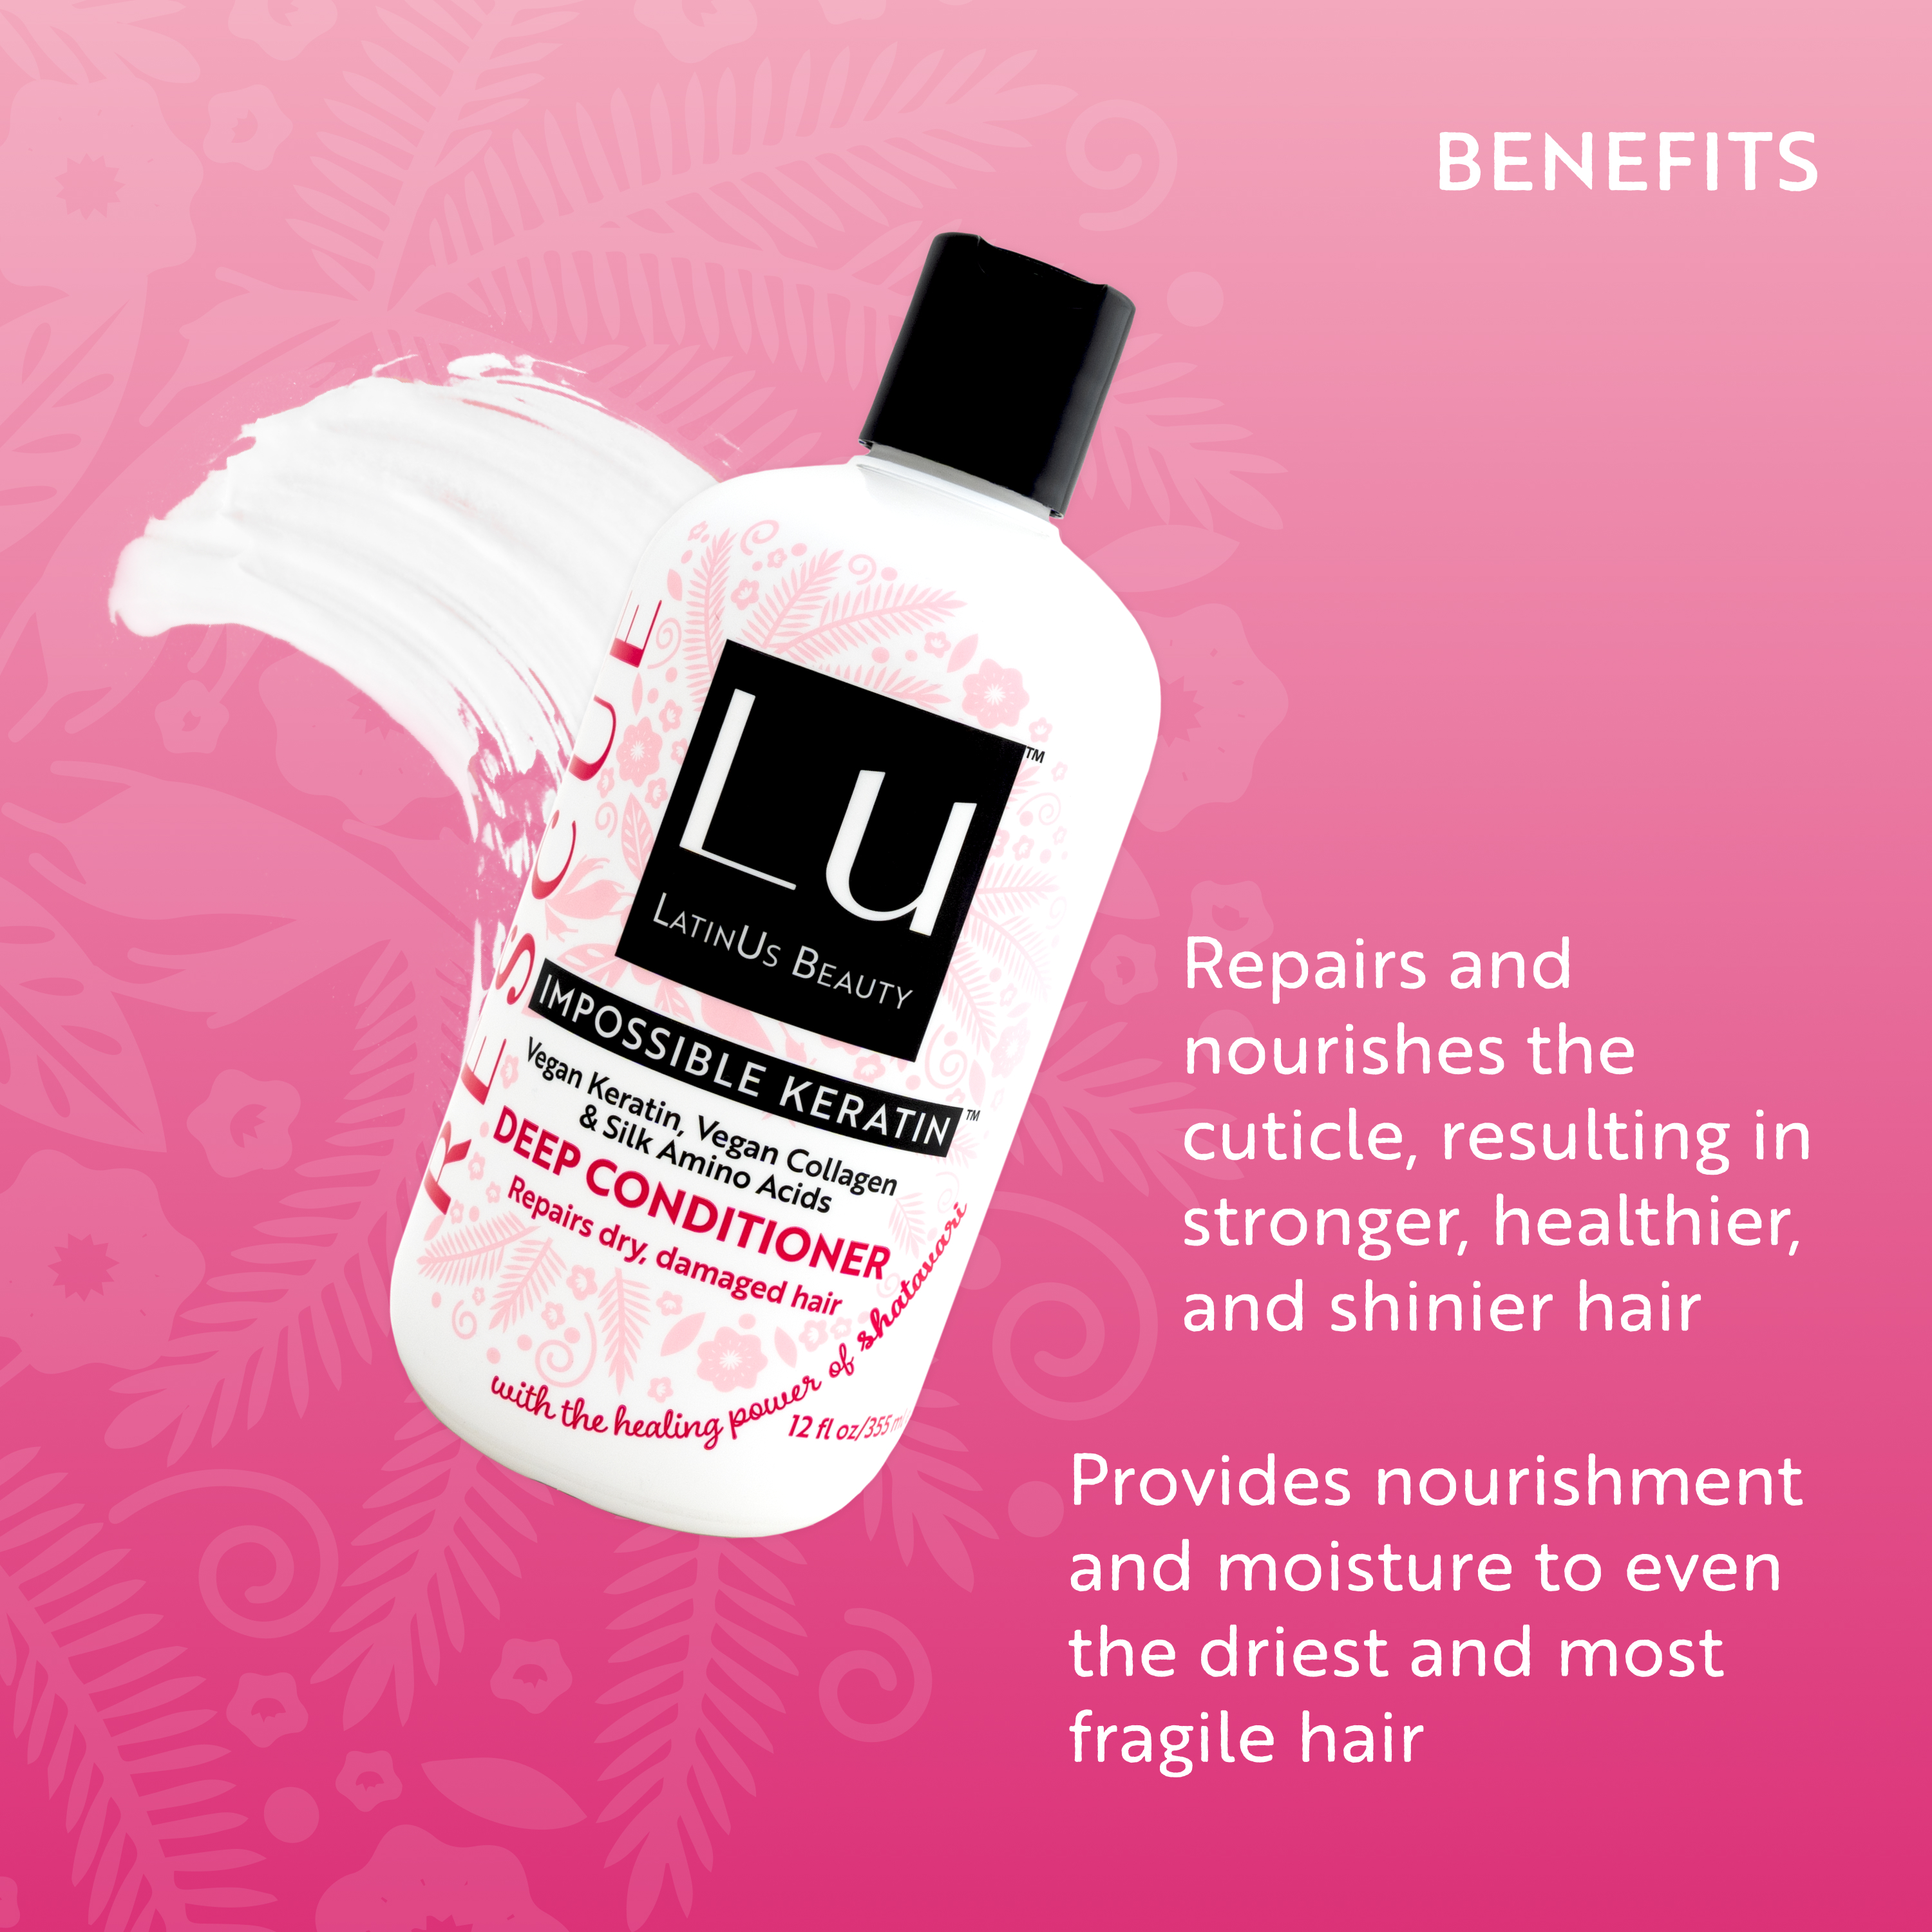 LU LatinUs Beauty Rescue Damage Repair Conditioner with Impossible Keratin, for All Hair Types, 12 oz - image 4 of 10